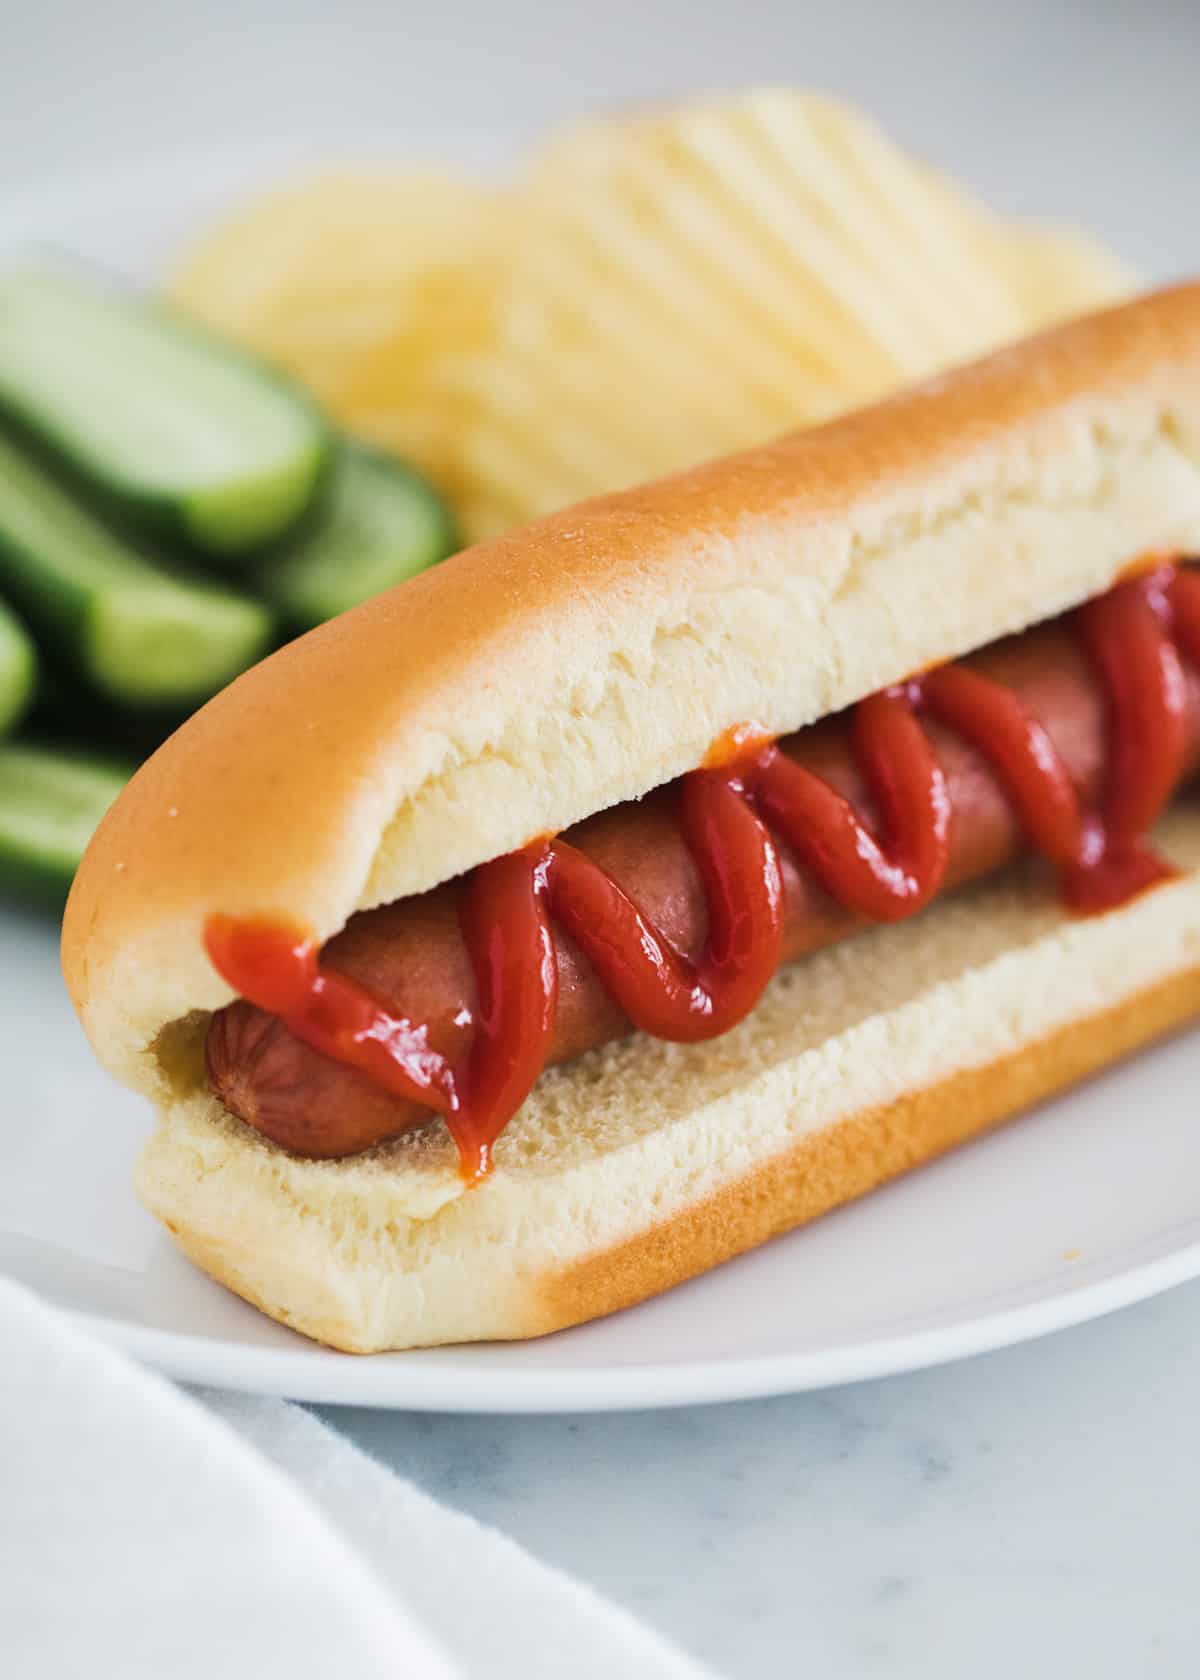 Hot dog with ketchup on white plate.